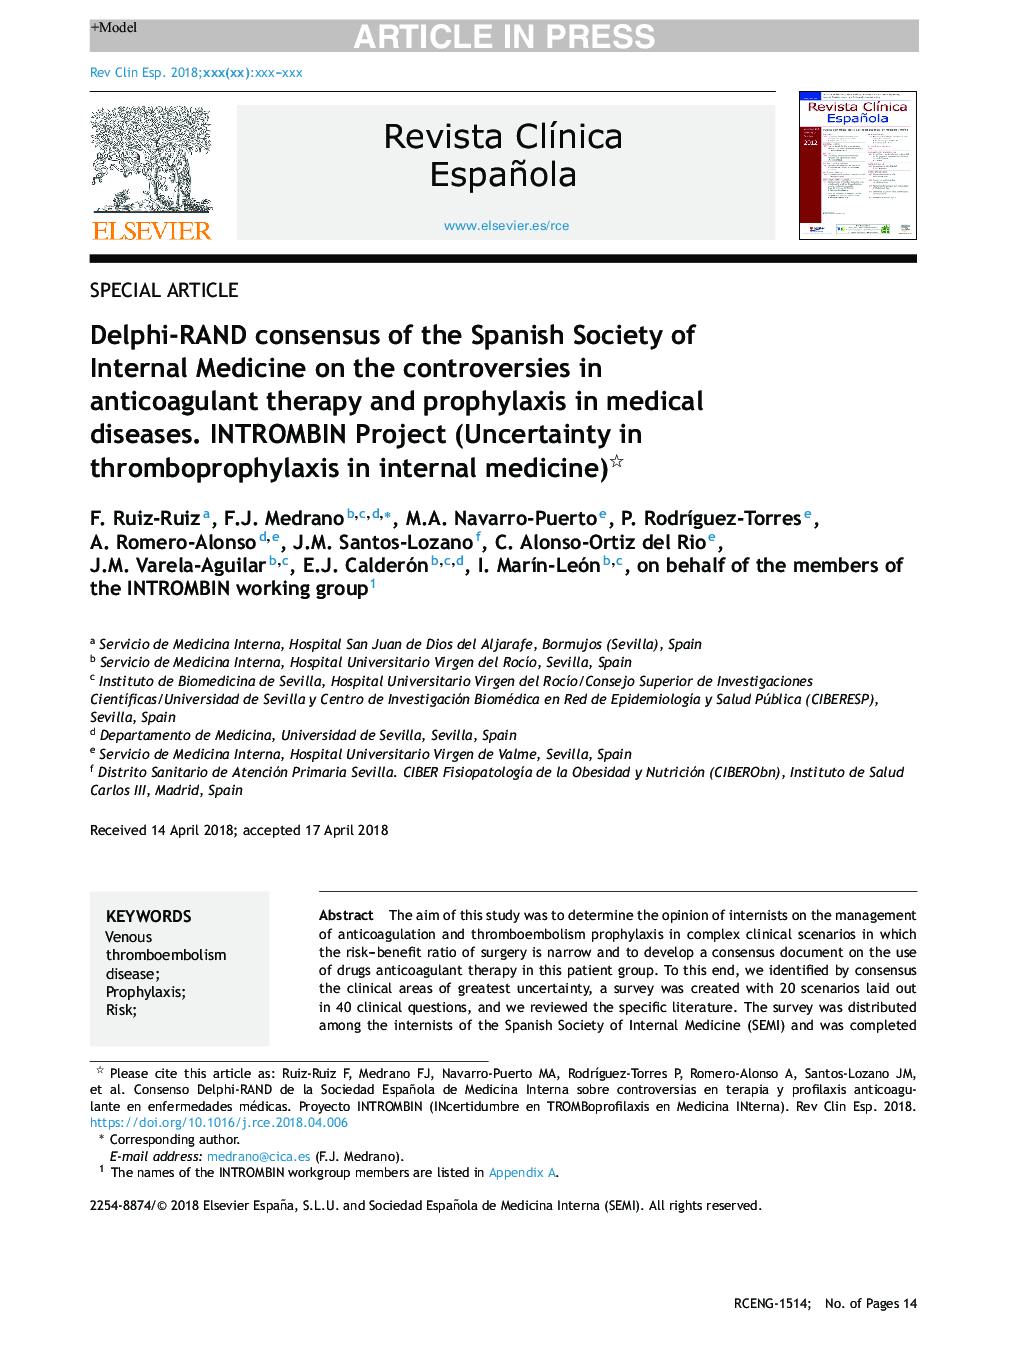 Delphi-RAND consensus of the Spanish Society of Internal Medicine on the controversies in anticoagulant therapy and prophylaxis in medical diseases. INTROMBIN Project (Uncertainty in thromboprophylaxis in internal medicine)